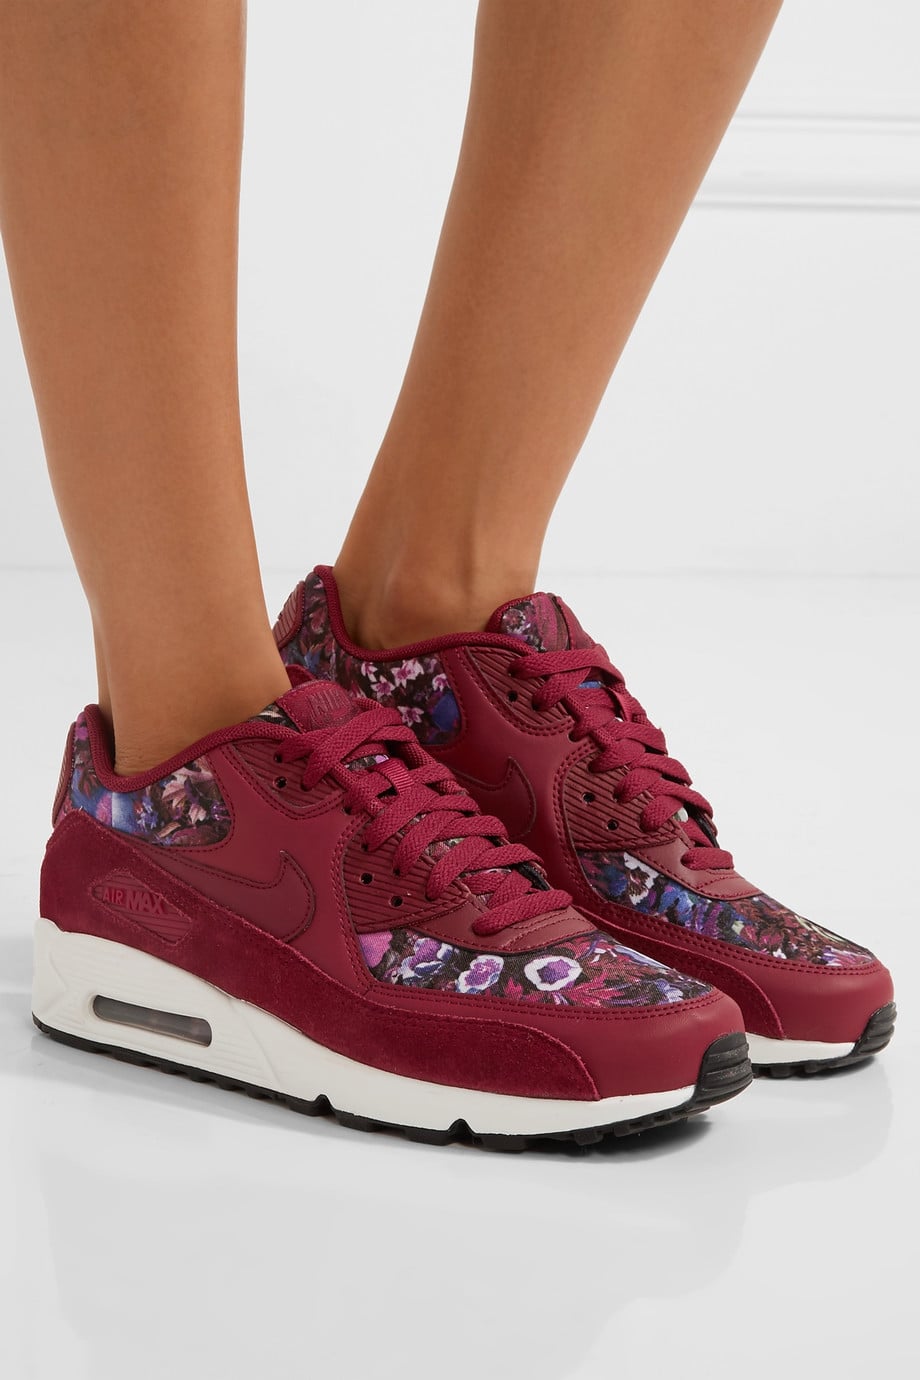 Nike Air 90 Se Floral-Print Sneakers | Kick-Start Fall With Burgundy Sneakers — We Found 8 Pairs | POPSUGAR Photo 7